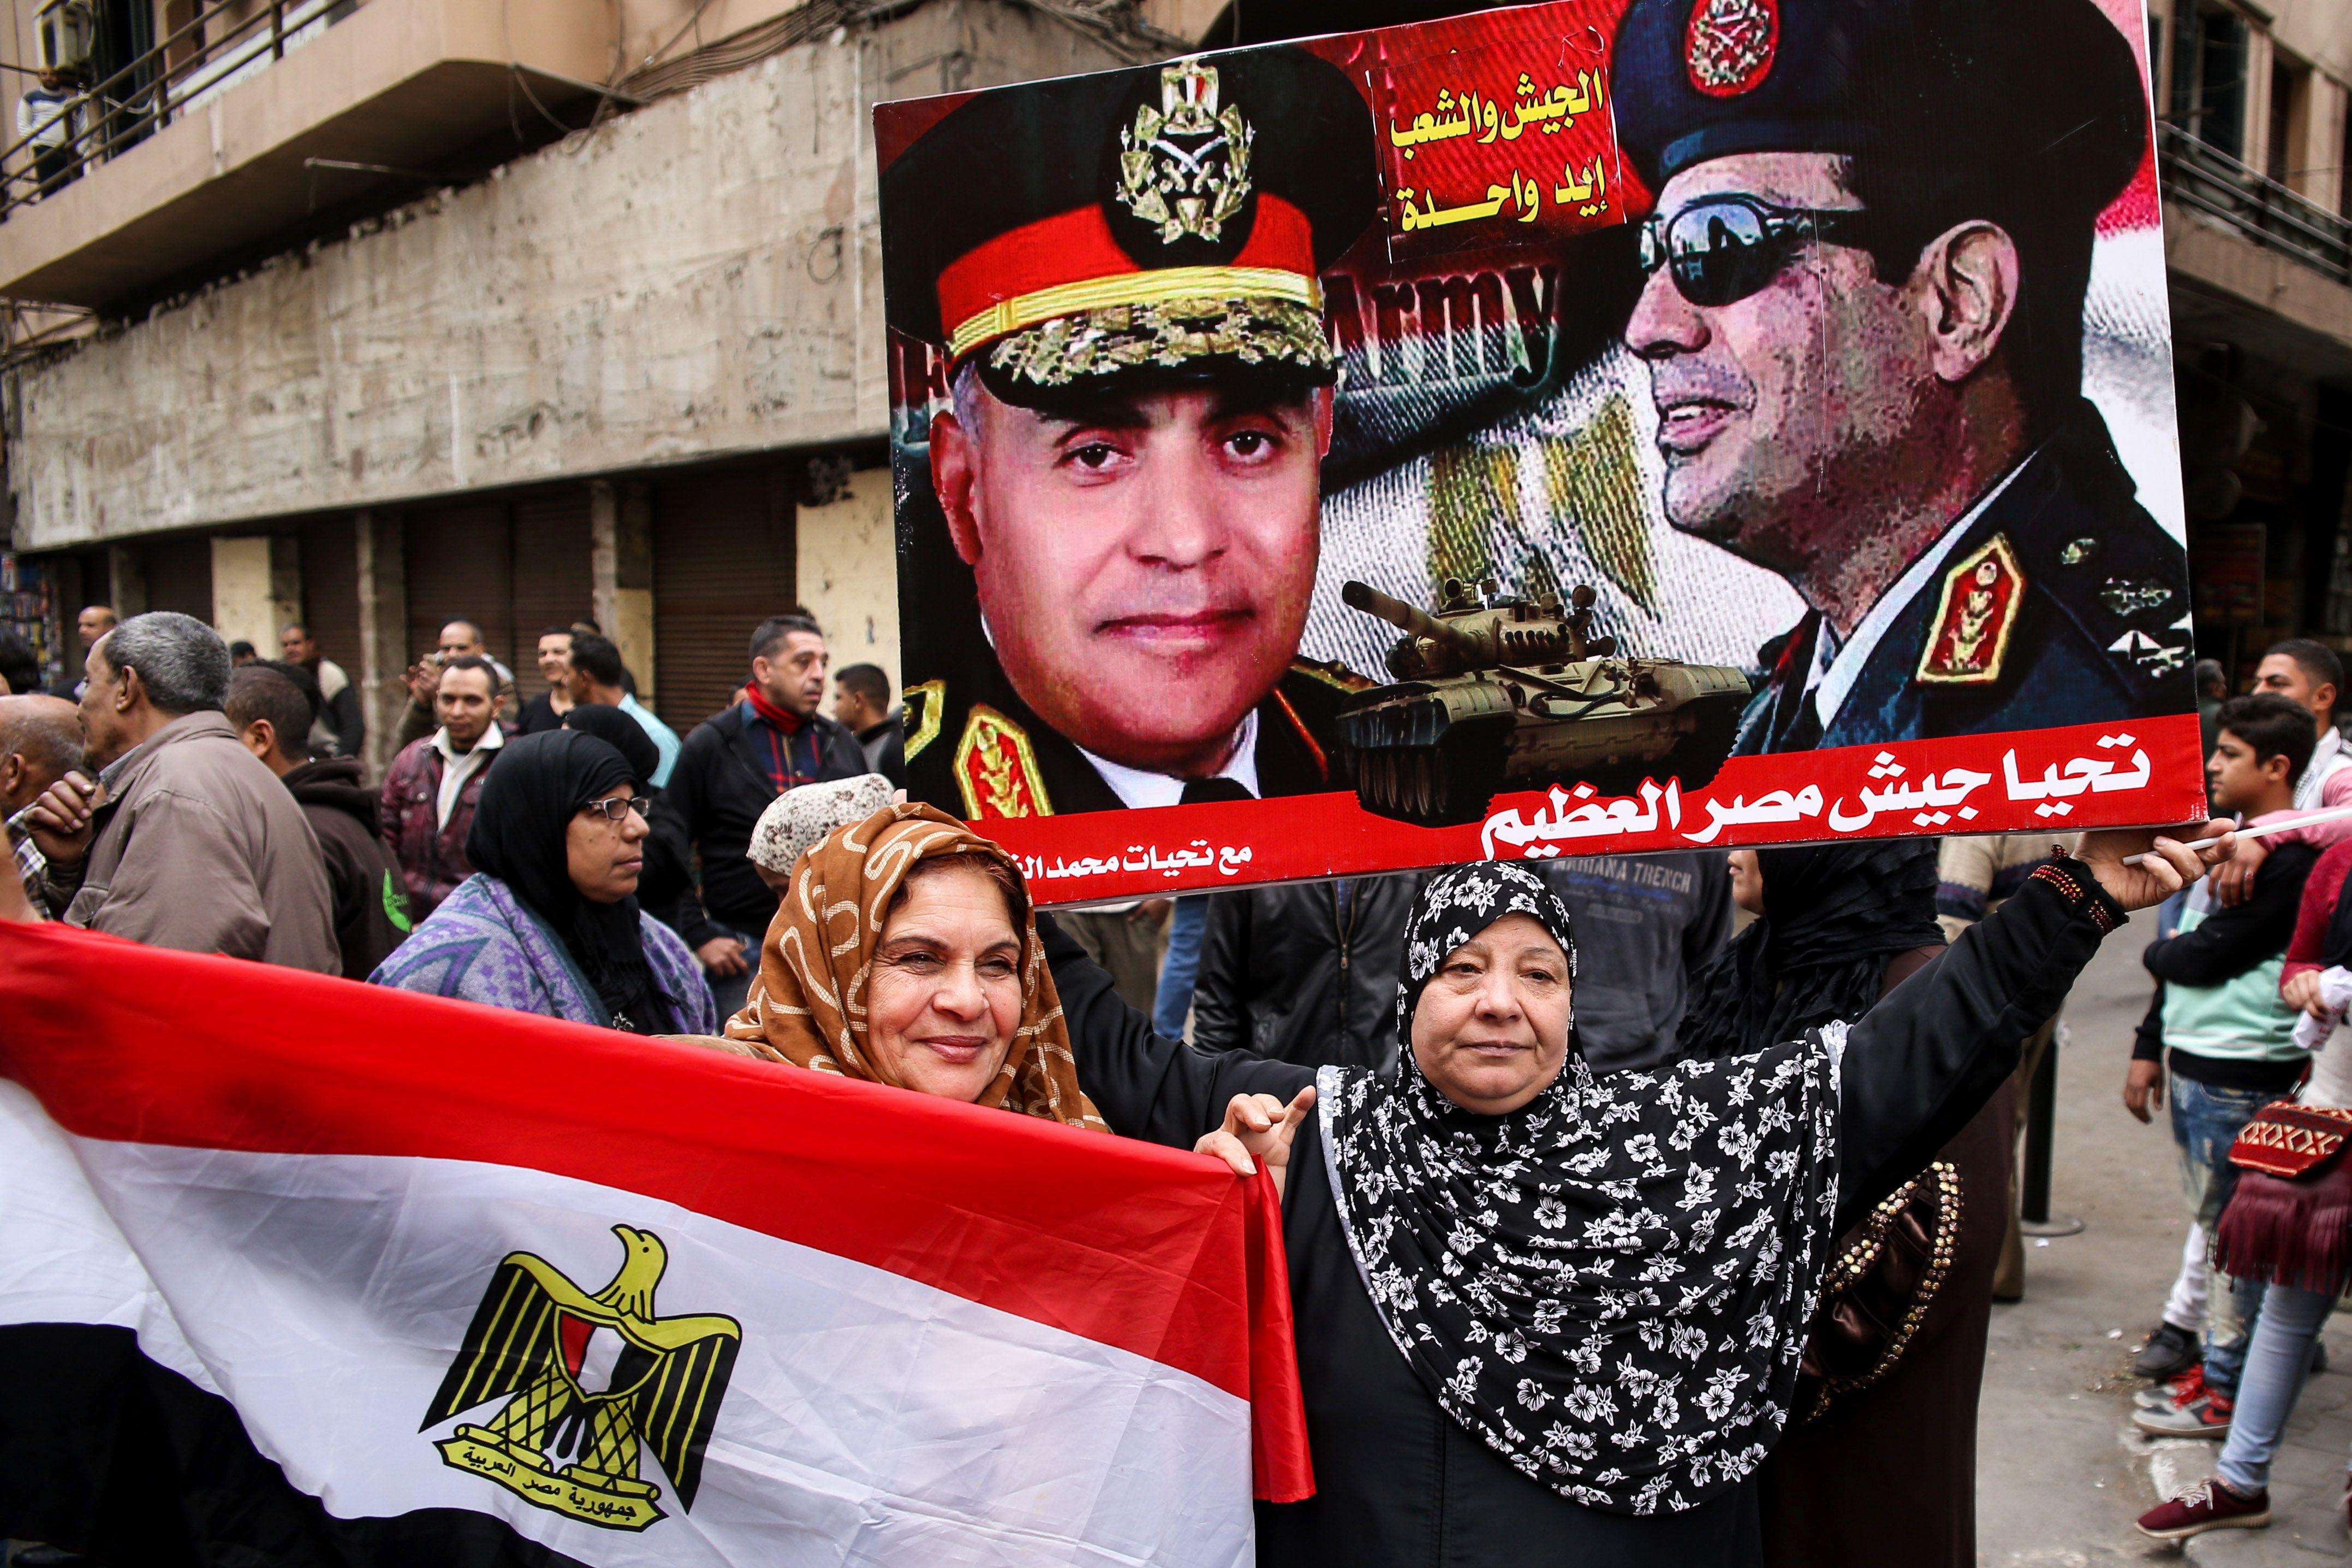 Egyptian women hold their national flag and a poster bearing portraits of President Abdel Fattah al-Sisi and Defense Minister Sedki Sobhi in Cairo's Tahrir Square on Jan. 25, 2017.